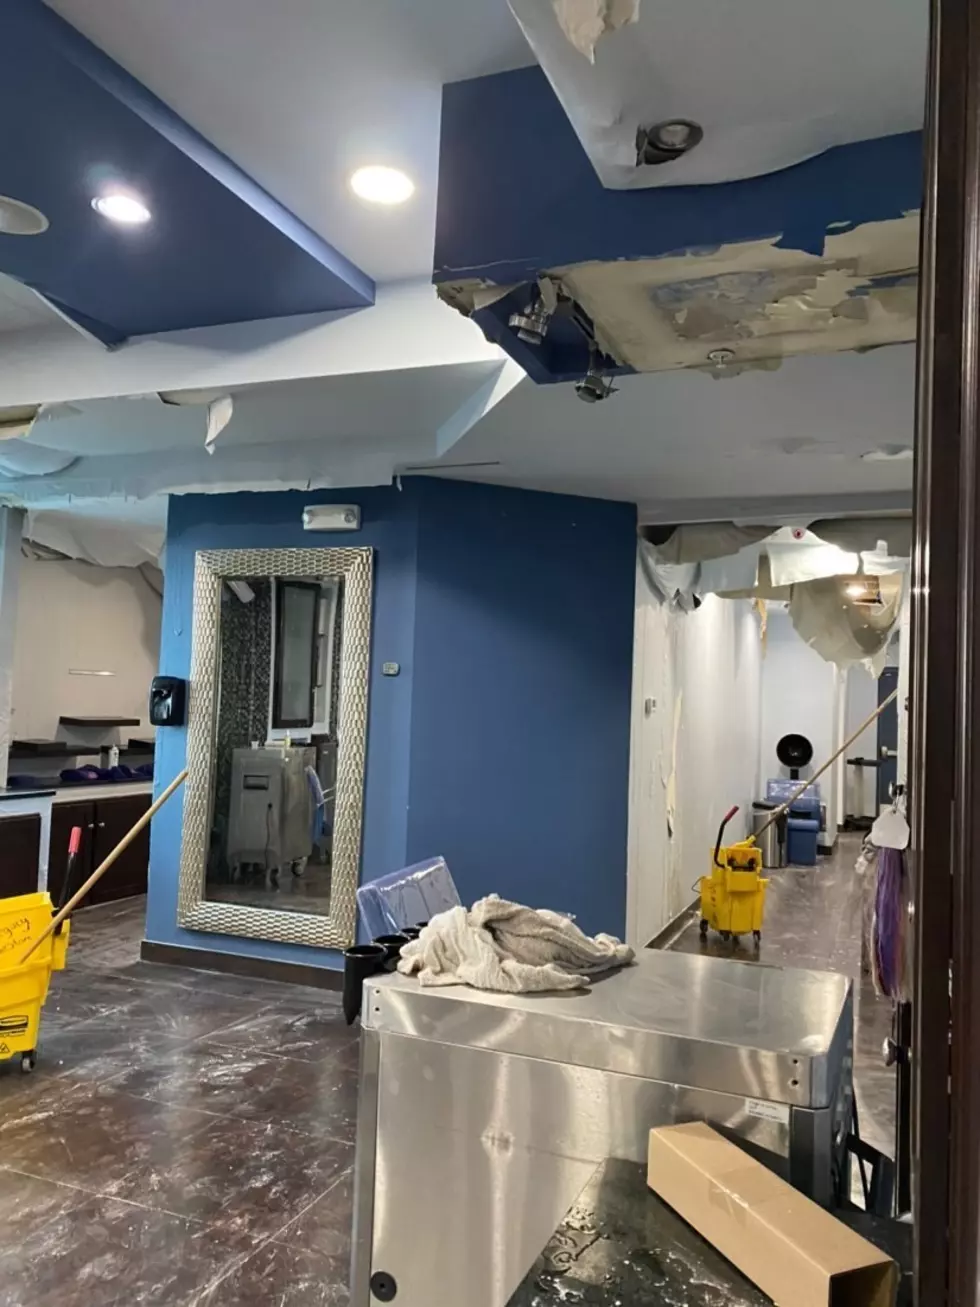 Mix Salon Spa Photos of Water Damage Caused by Texas Weather